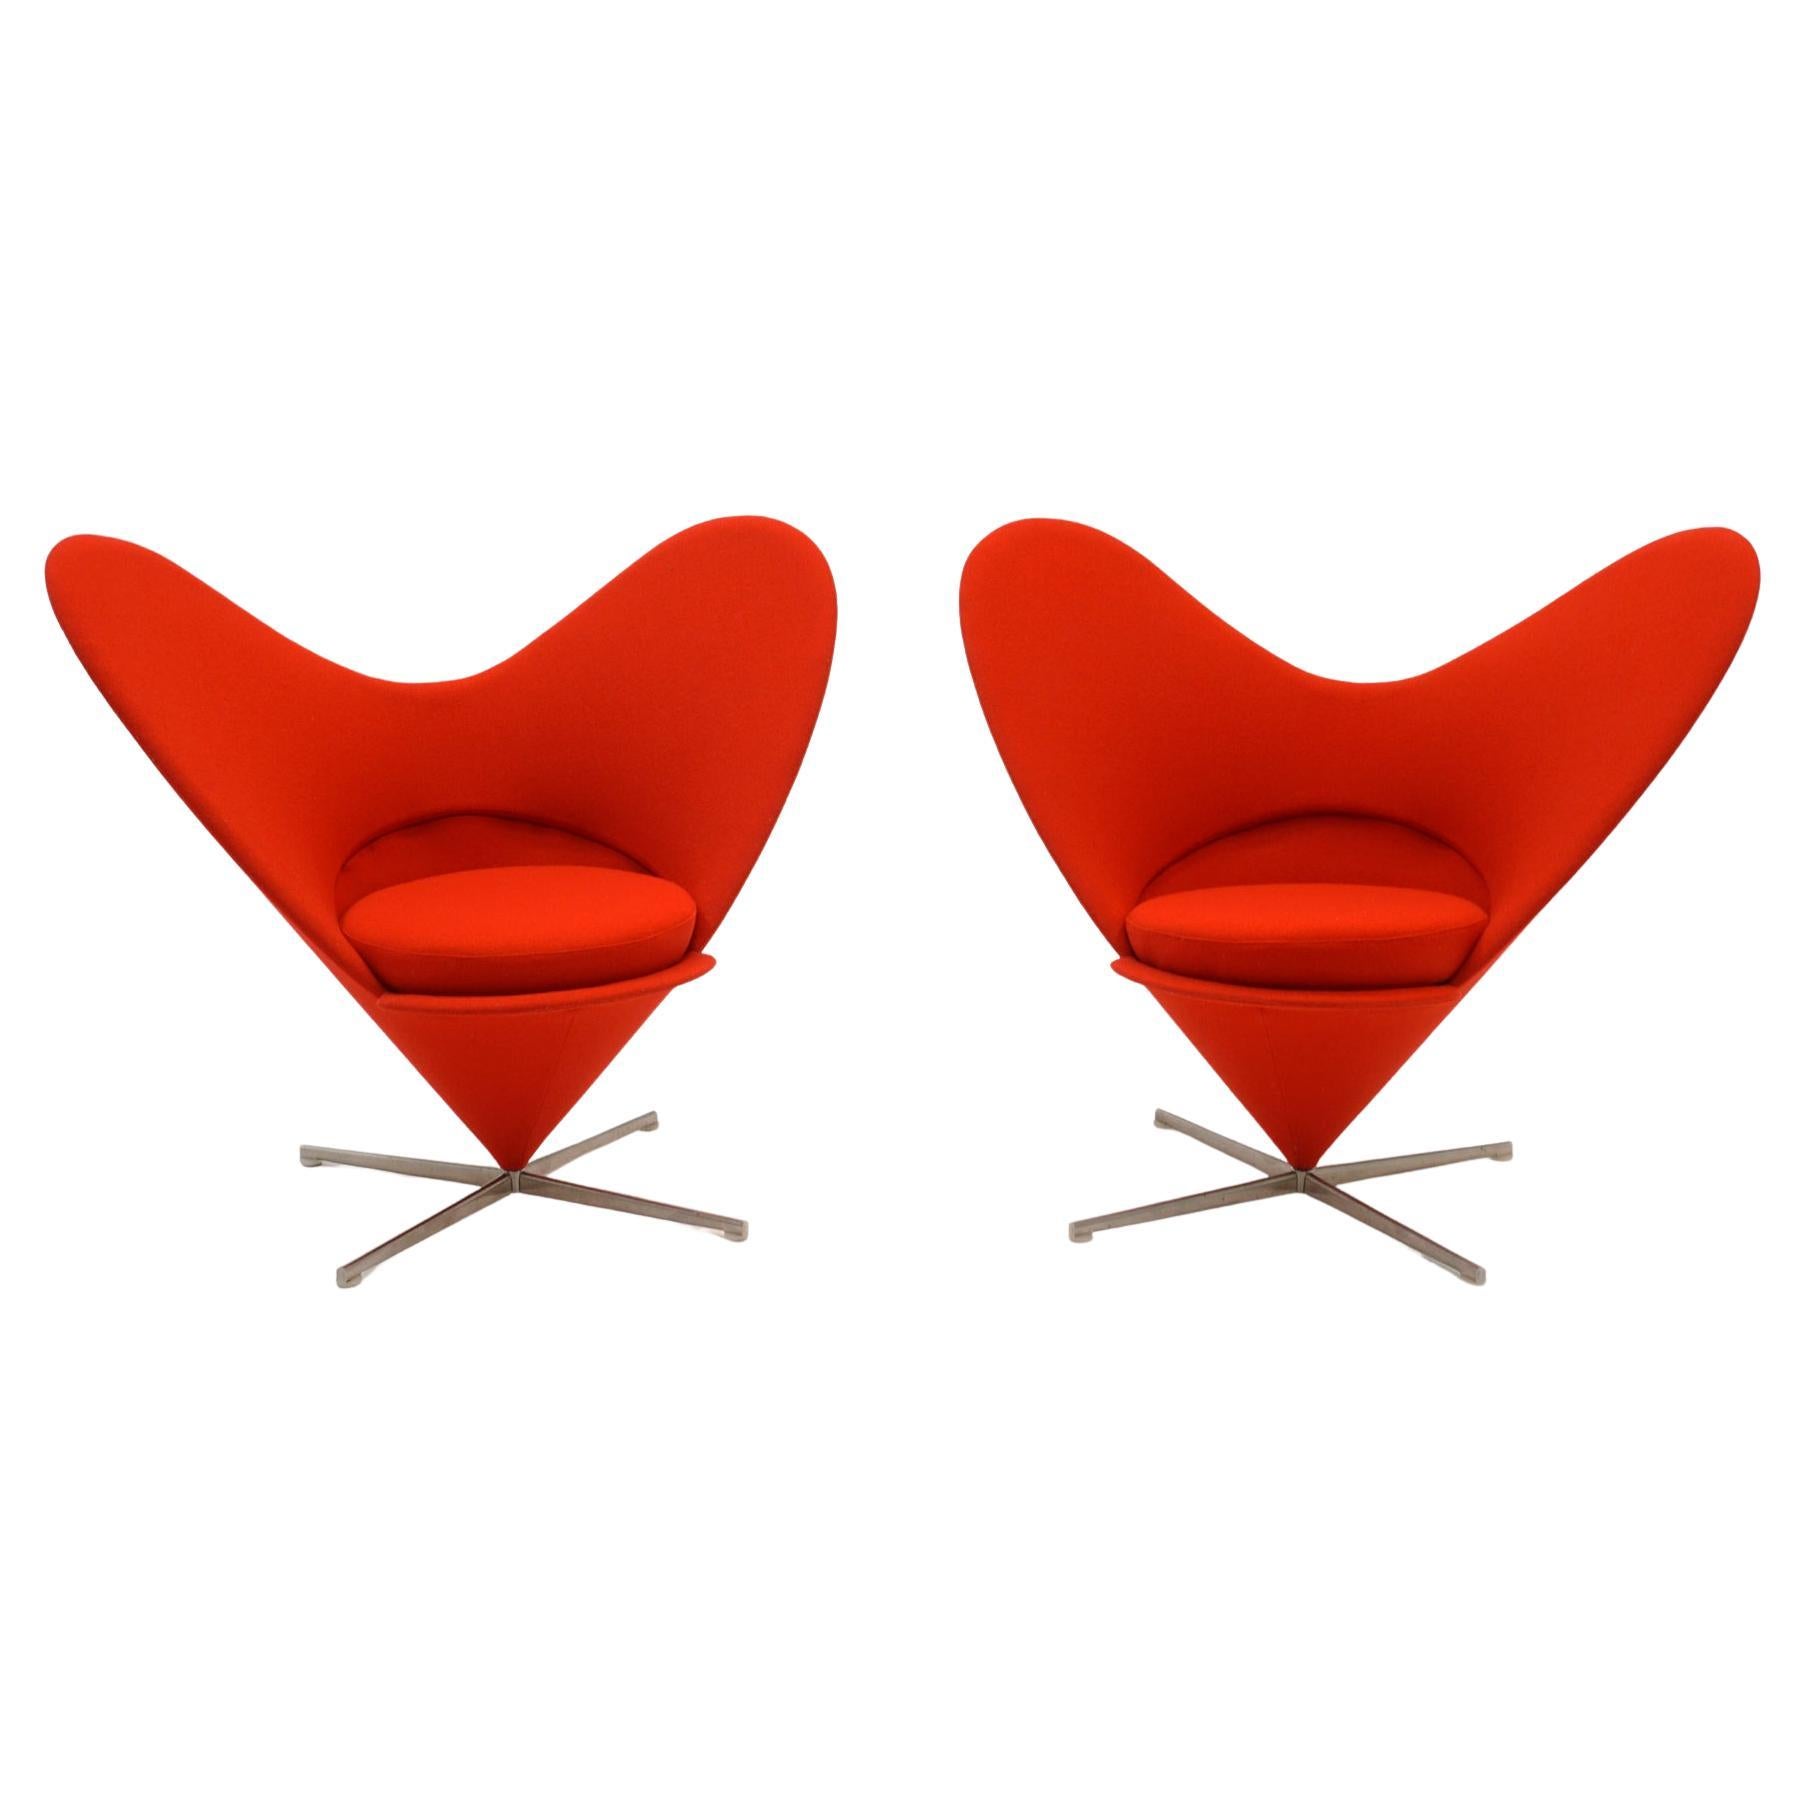 Pair of Red Heart Chairs by Verner Panton for Vitra, Great Condition